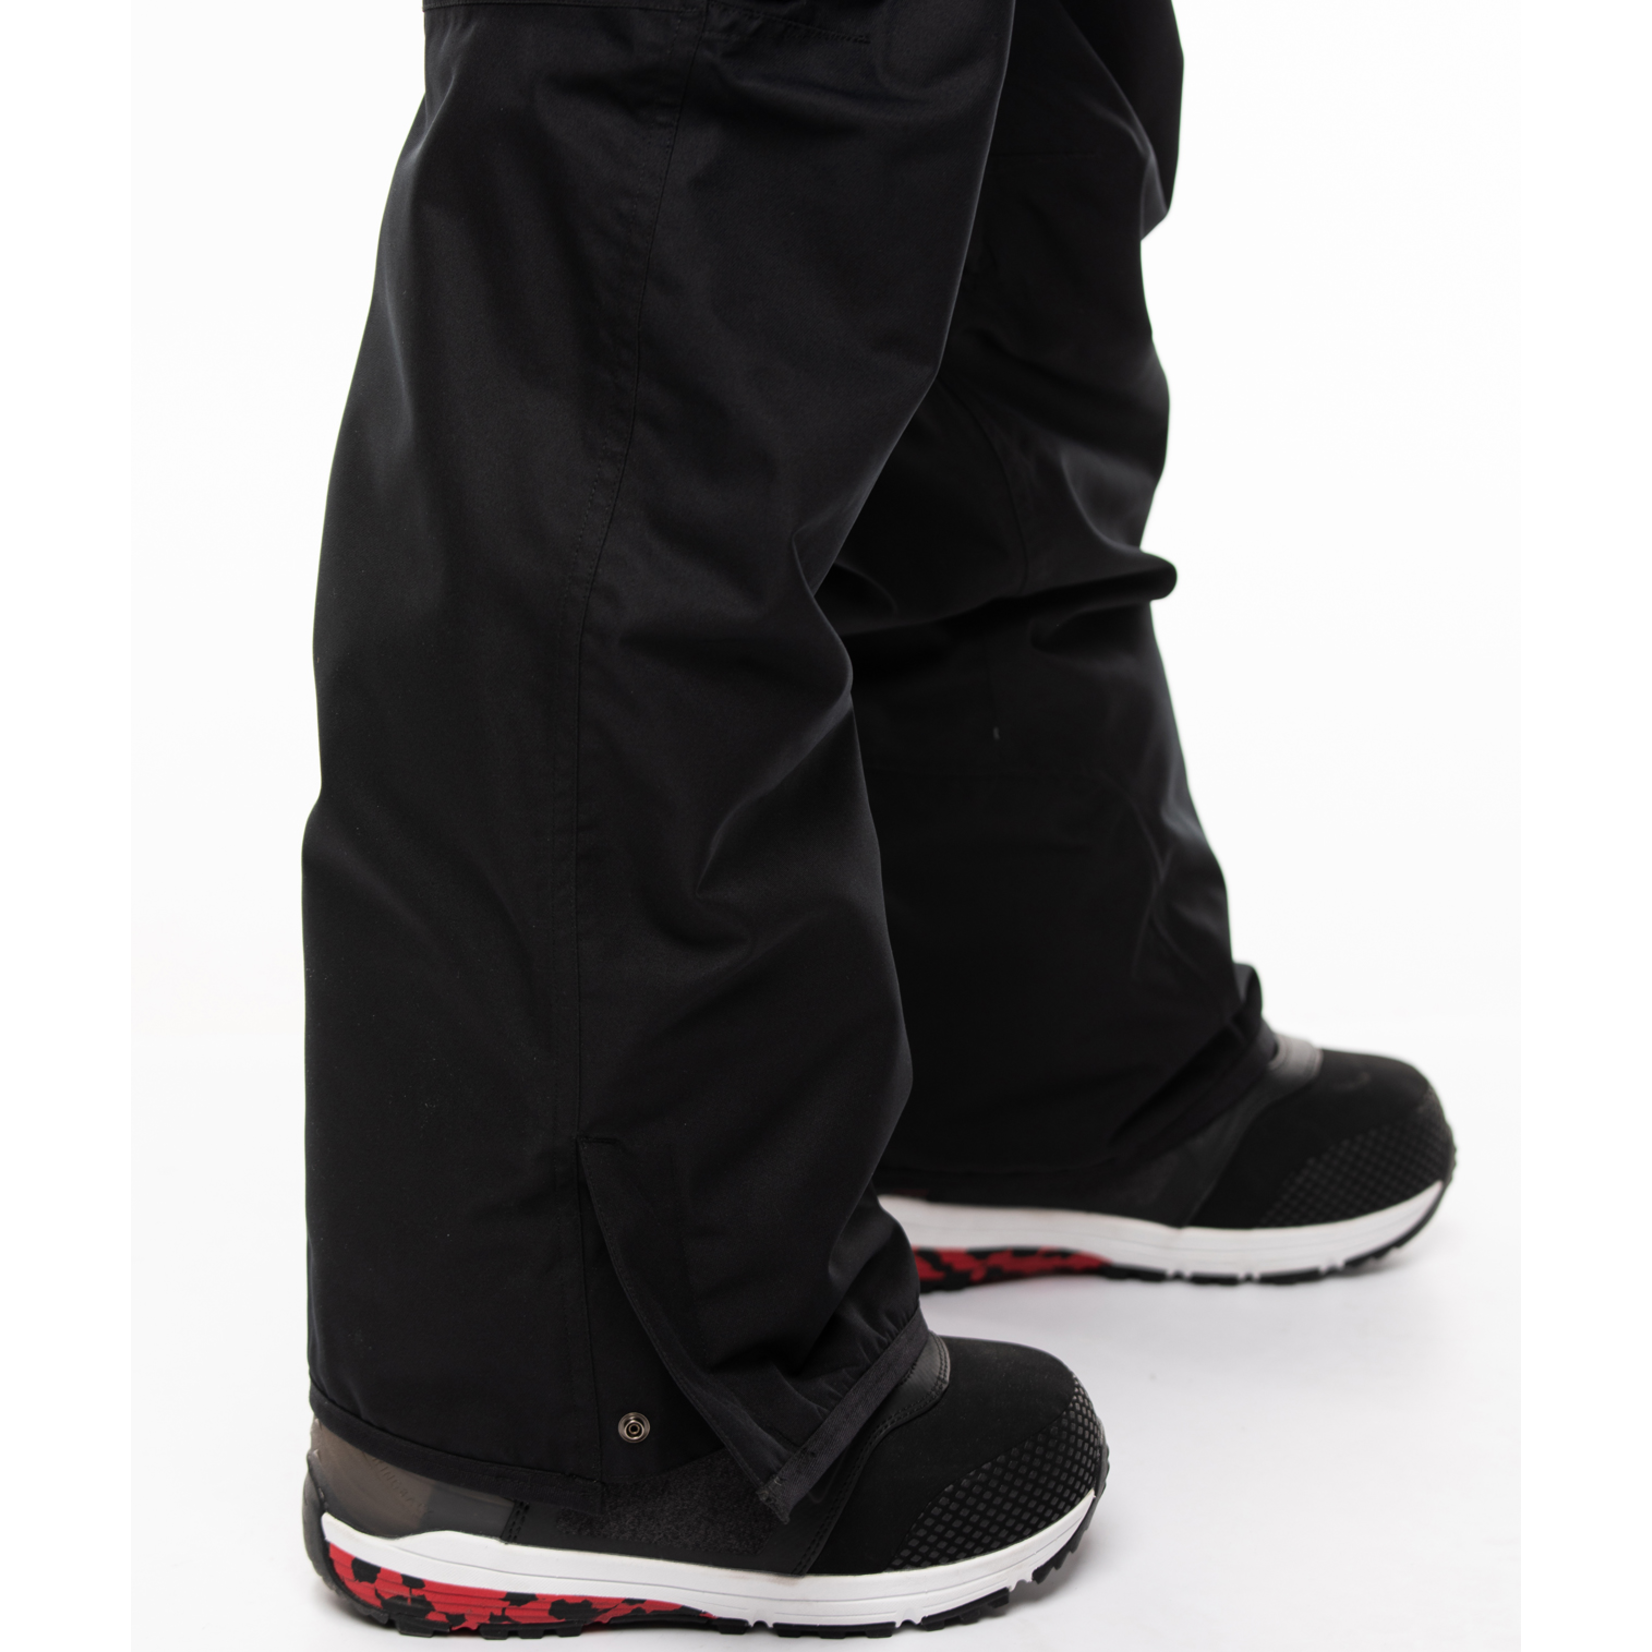 686 686 Men's Infinity Insulated Cargo Pant